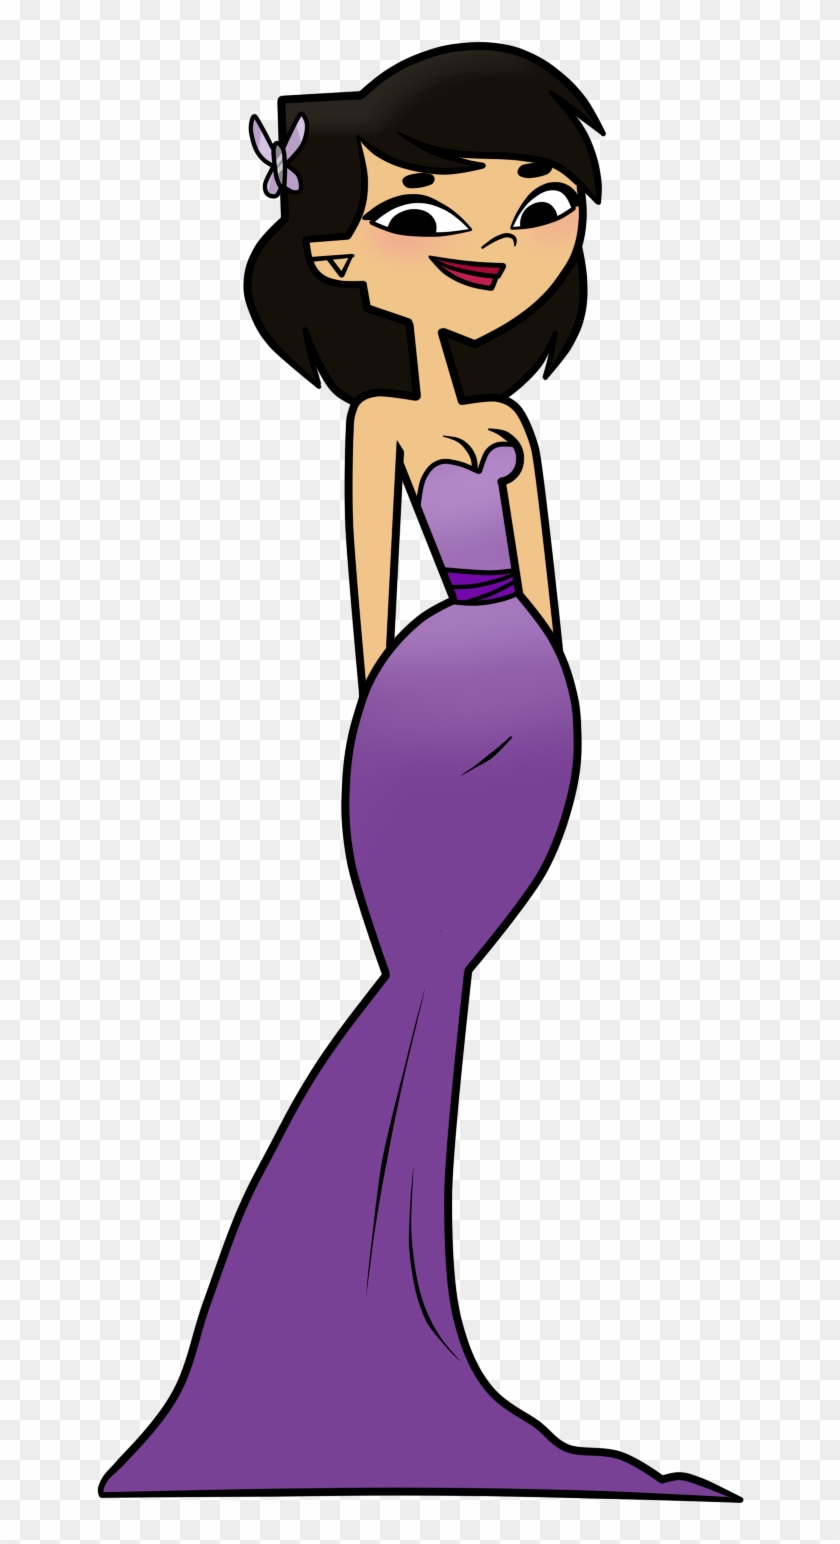 Sky In A Purple Prom Dress By Evaheartsart - Prom #319329